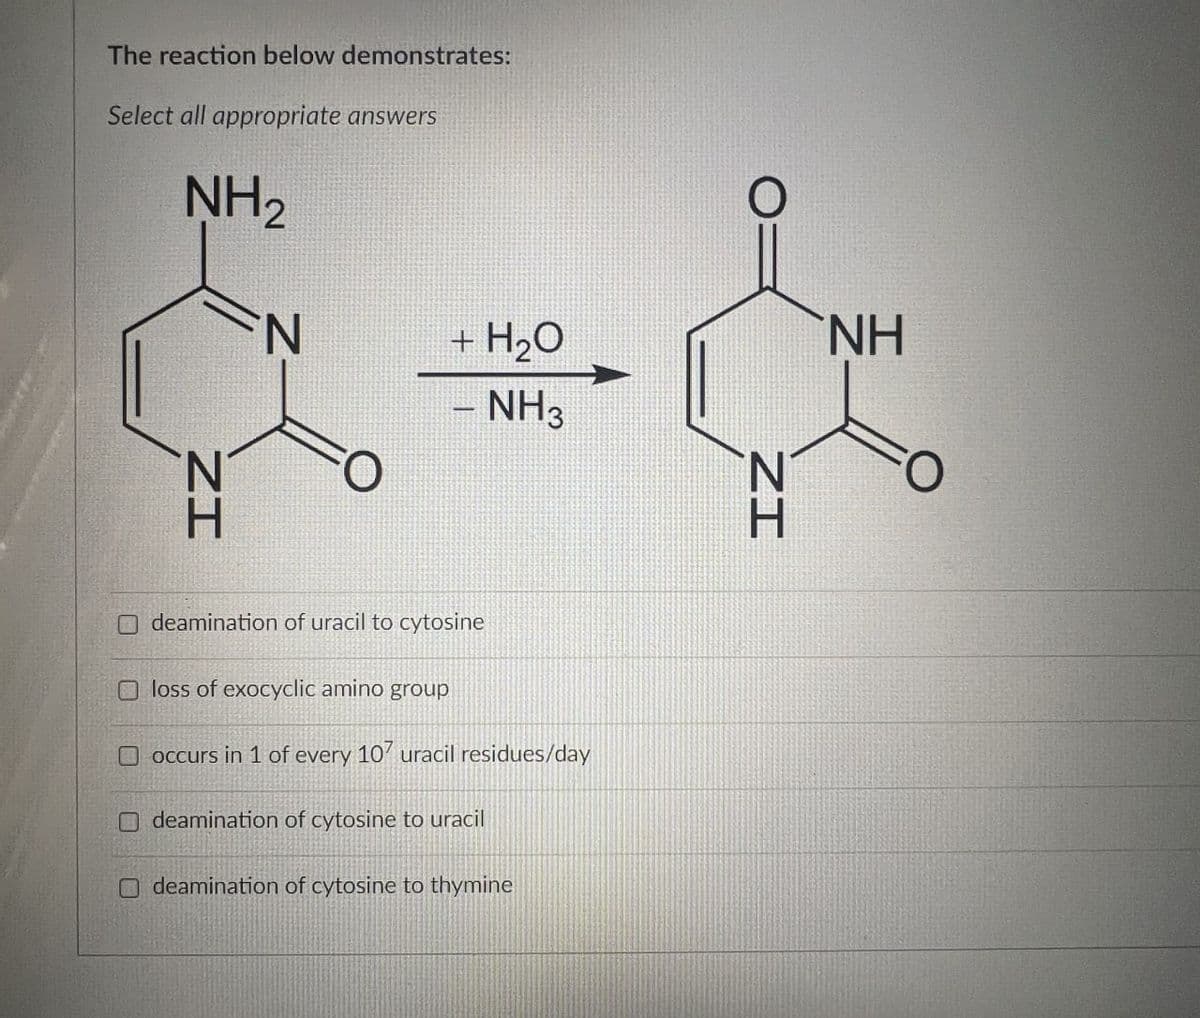 The reaction below demonstrates:
Select all appropriate answers
NH2
N
+ H₂O
NH
ΖΙ
-
NH3
ZI
deamination of uracil to cytosine
loss of exocyclic amino group
occurs in 1 of every 107 uracil residues/day
deamination of cytosine to uracil
deamination of cytosine to thymine